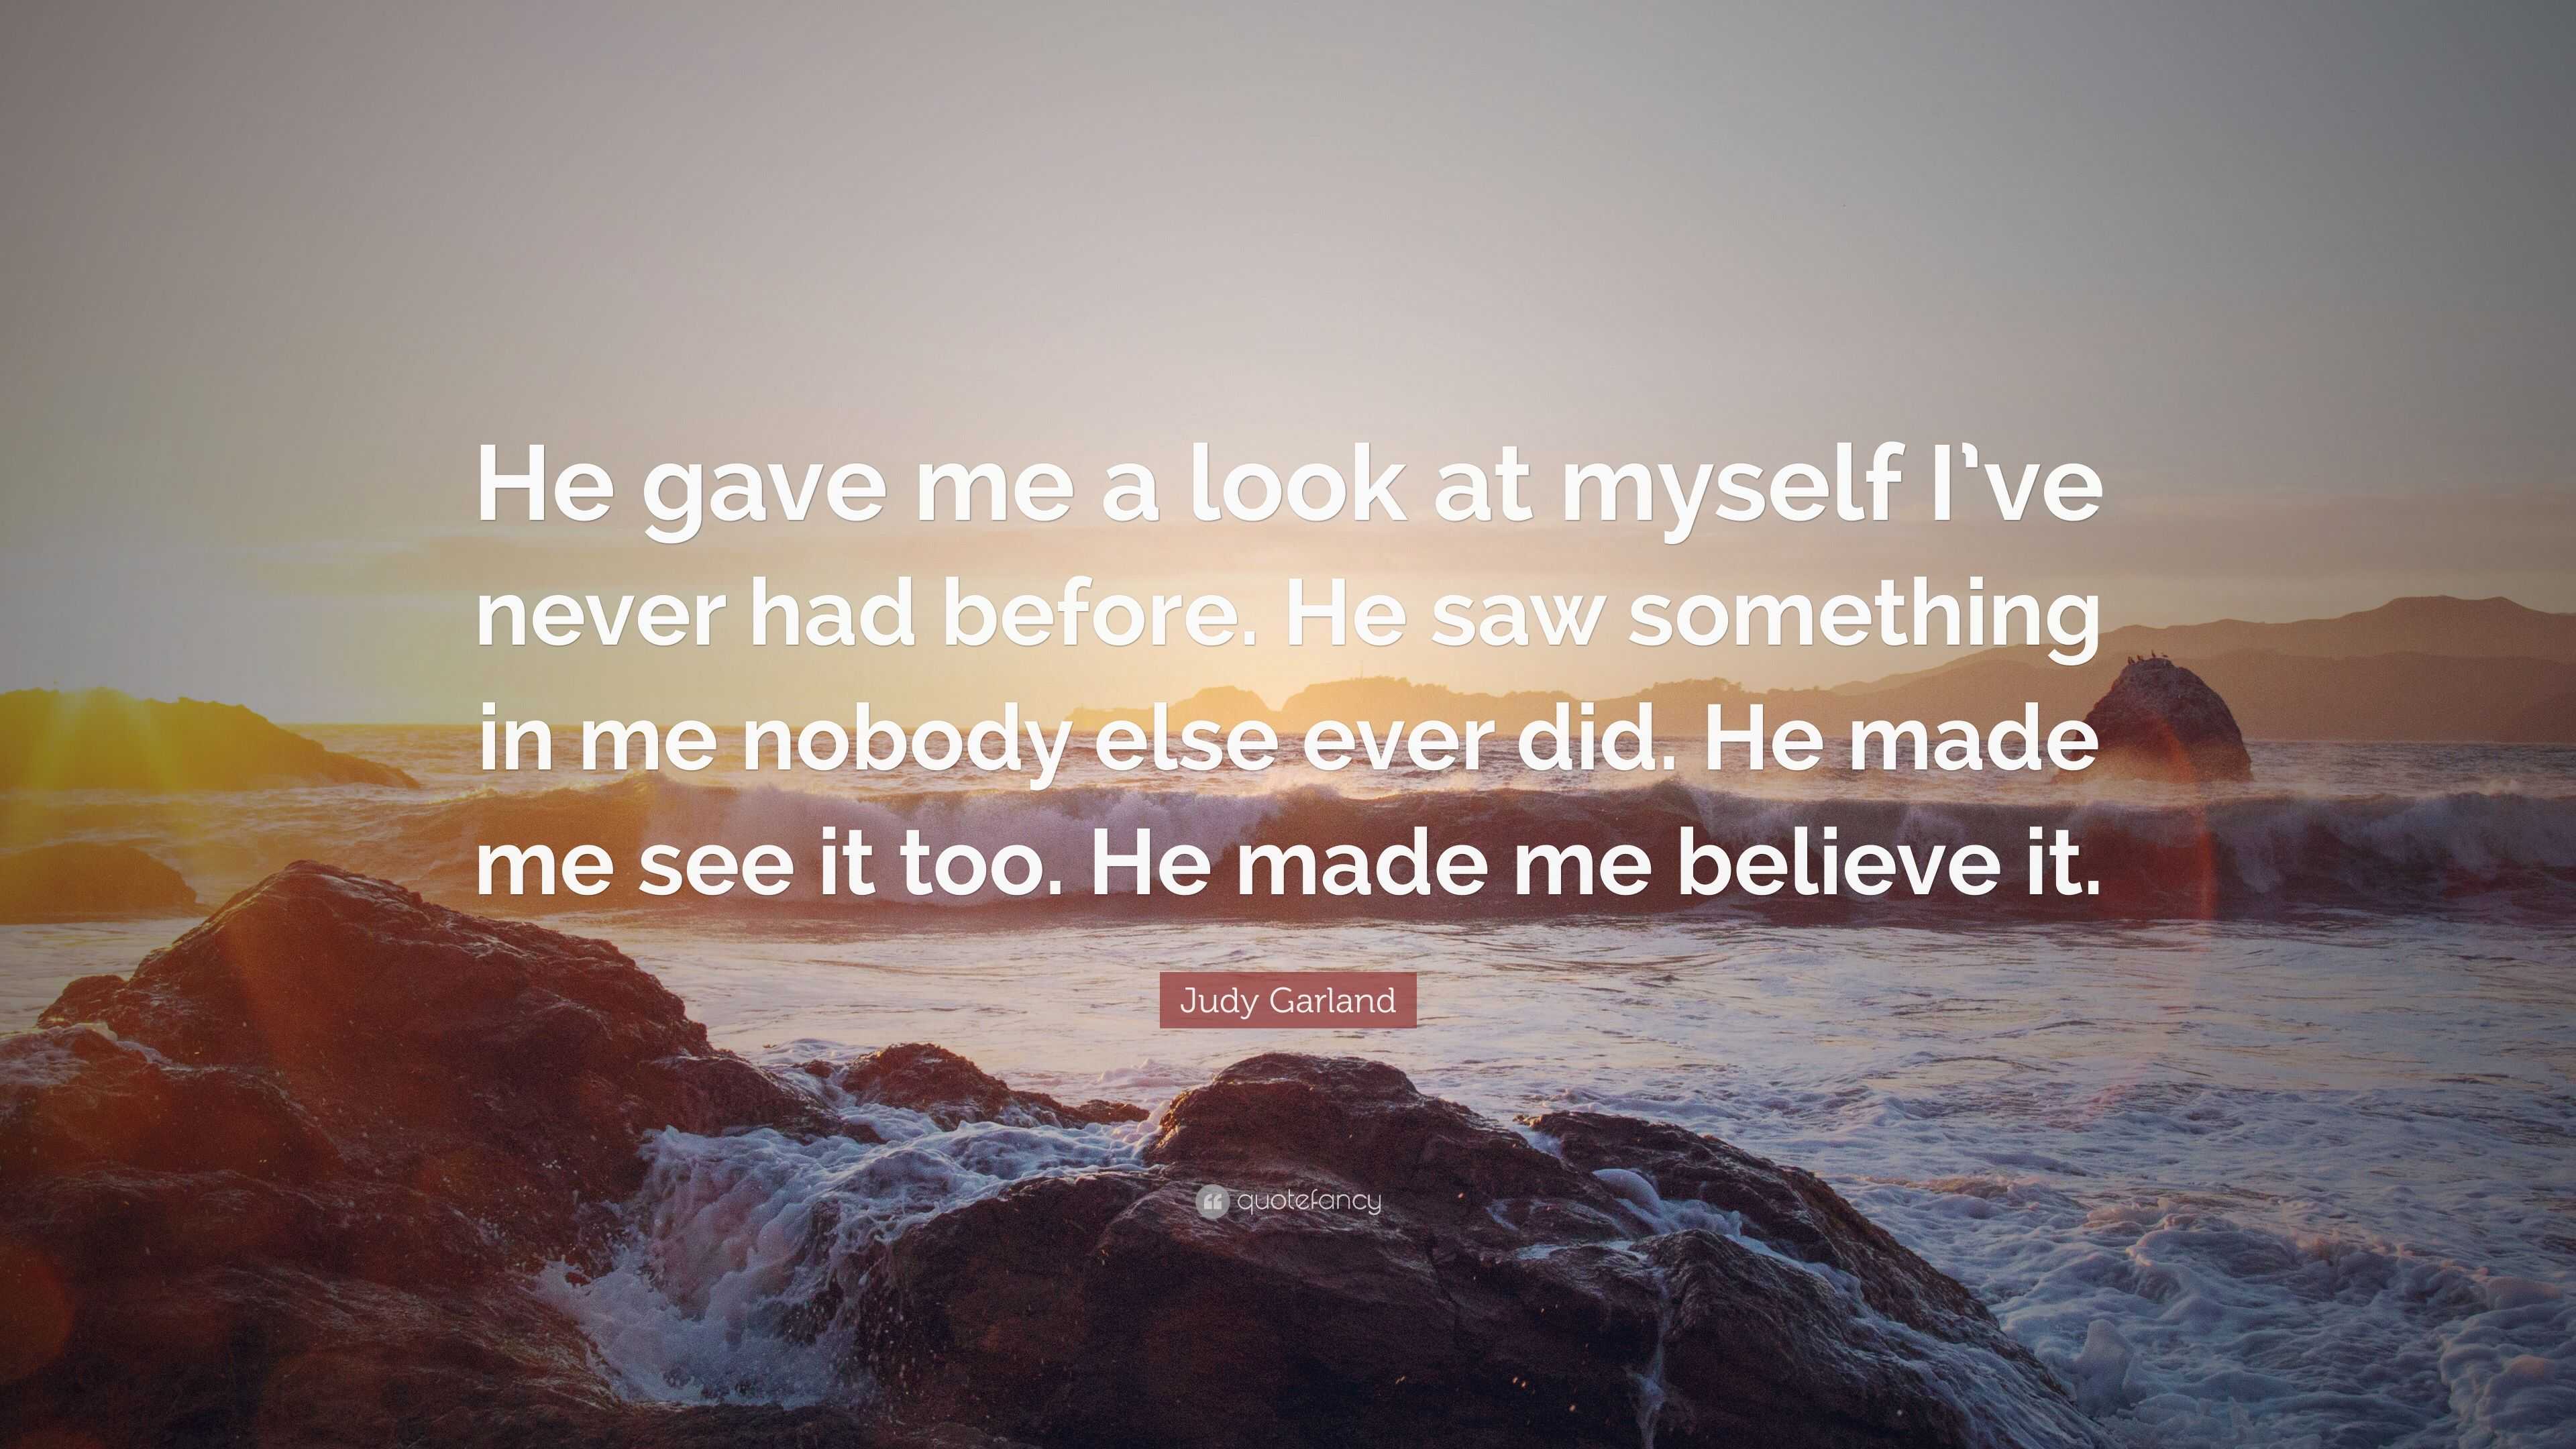 Judy Garland Quote: “He gave me a look at myself I’ve never had before ...